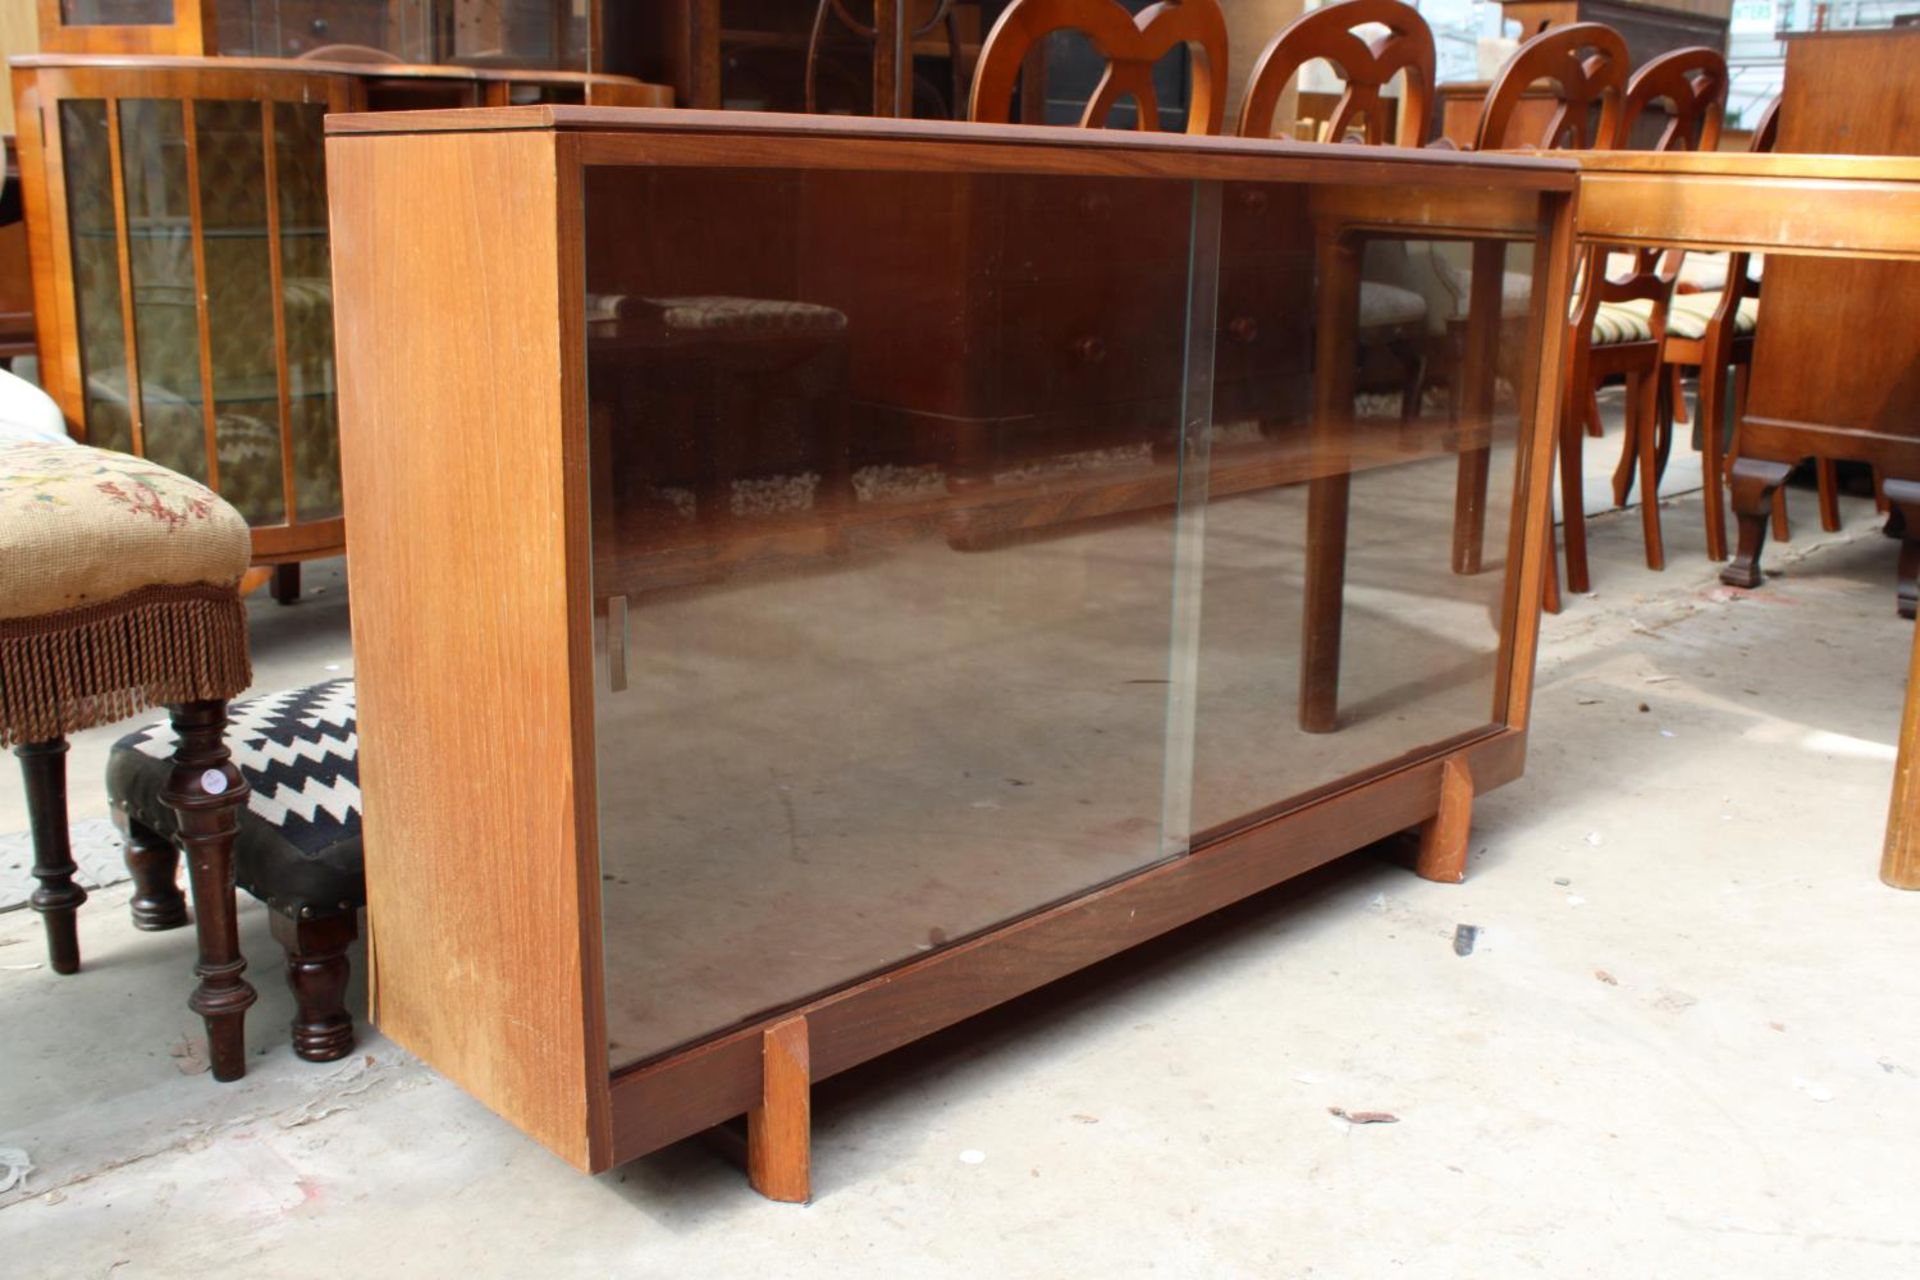 A RETRO TEAK BOOKCASE WITH 2 GLASS SLIDING DOORS, 48" WIDE - Image 2 of 3